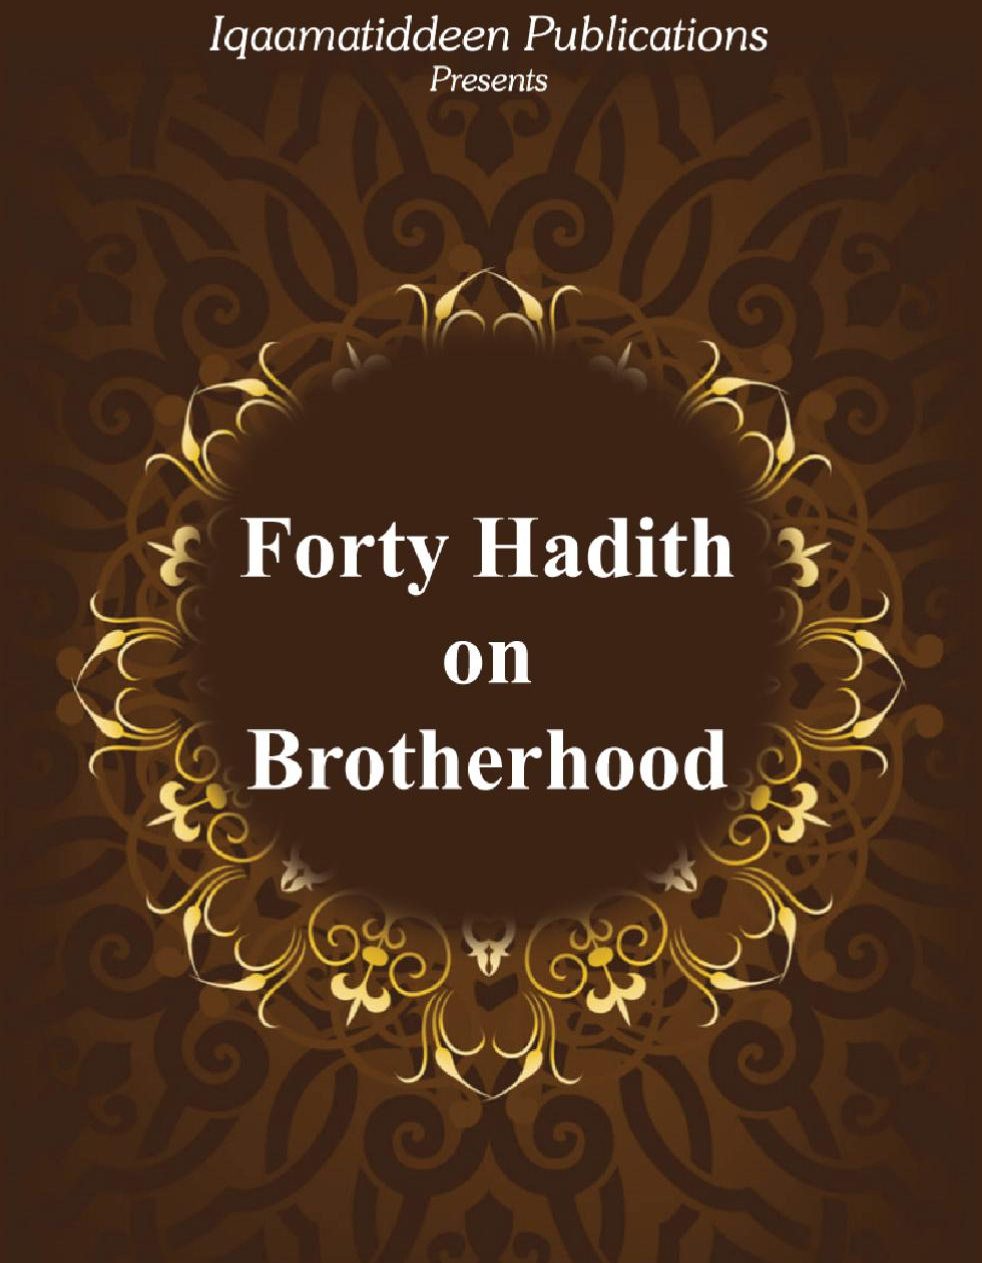 When did the Holy Prophet established brotherhood? Incident example, high incident, what incident in safety ,food type list and quranmualim Learn Quran, Quran translation, Quran mp3,quran explorer, Quran download, Quran translation in Urdu English to Arabic, Al Mualim, Quranmualim, V Islam pictures, Islam symbol, Shia Islam, Sunni Islam, Islam facts, Islam beliefs and practices Islam religion history, Islam guide, prophet Muhammad quotes, prophet Muhammad biography, Prophet Muhammad family tree.